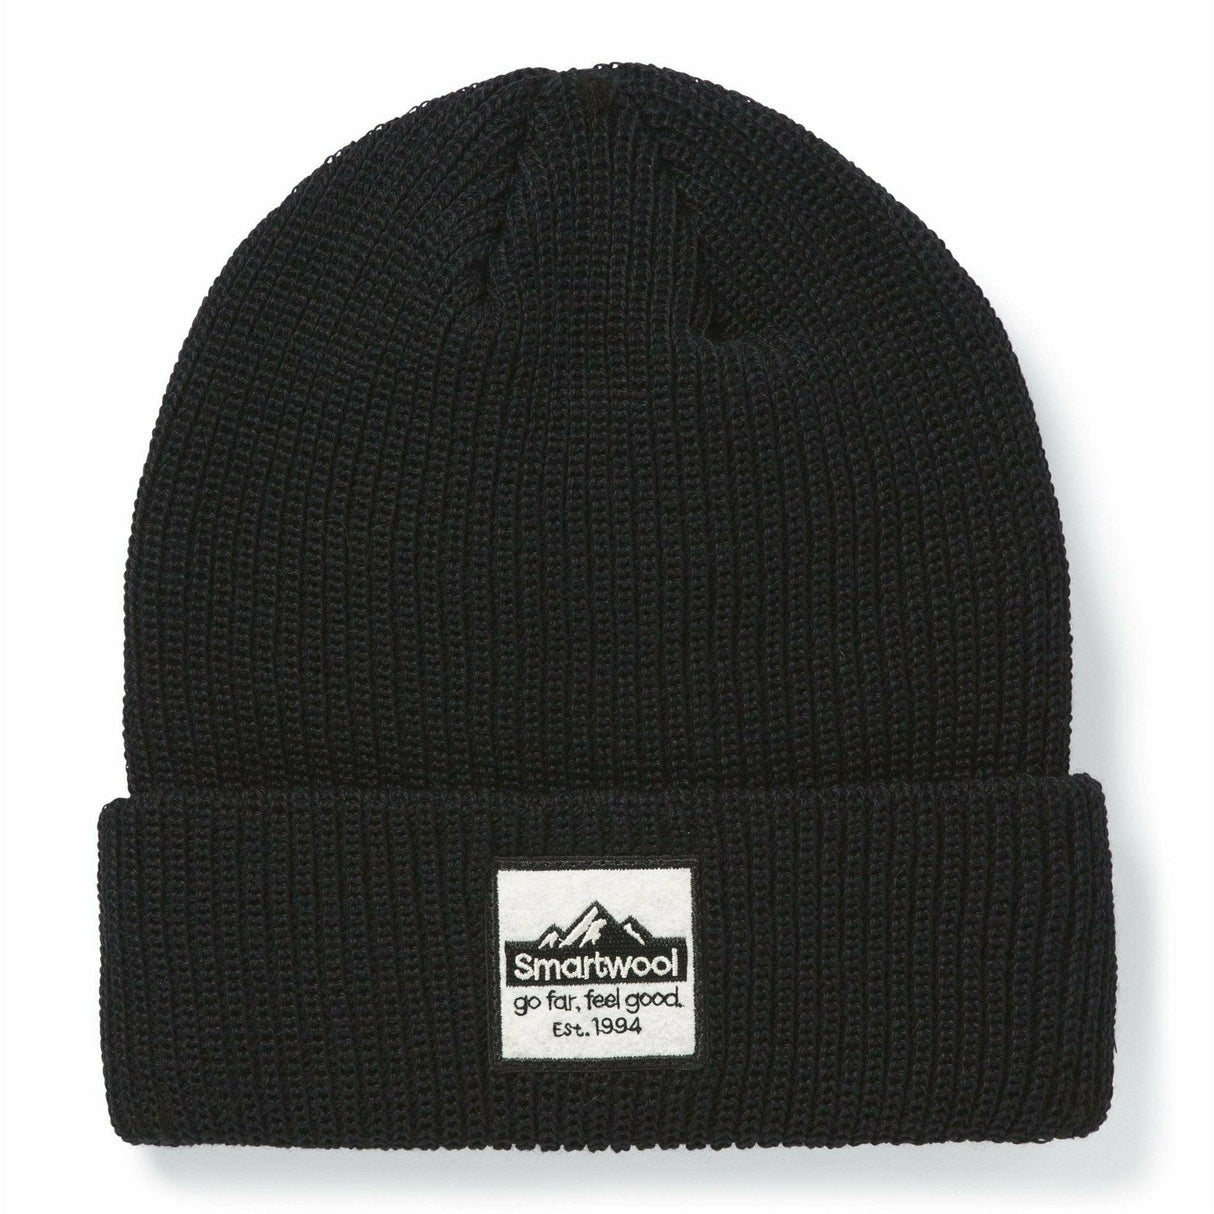 Smartwool Patch Beanie  -  One Size Fits Most / Black